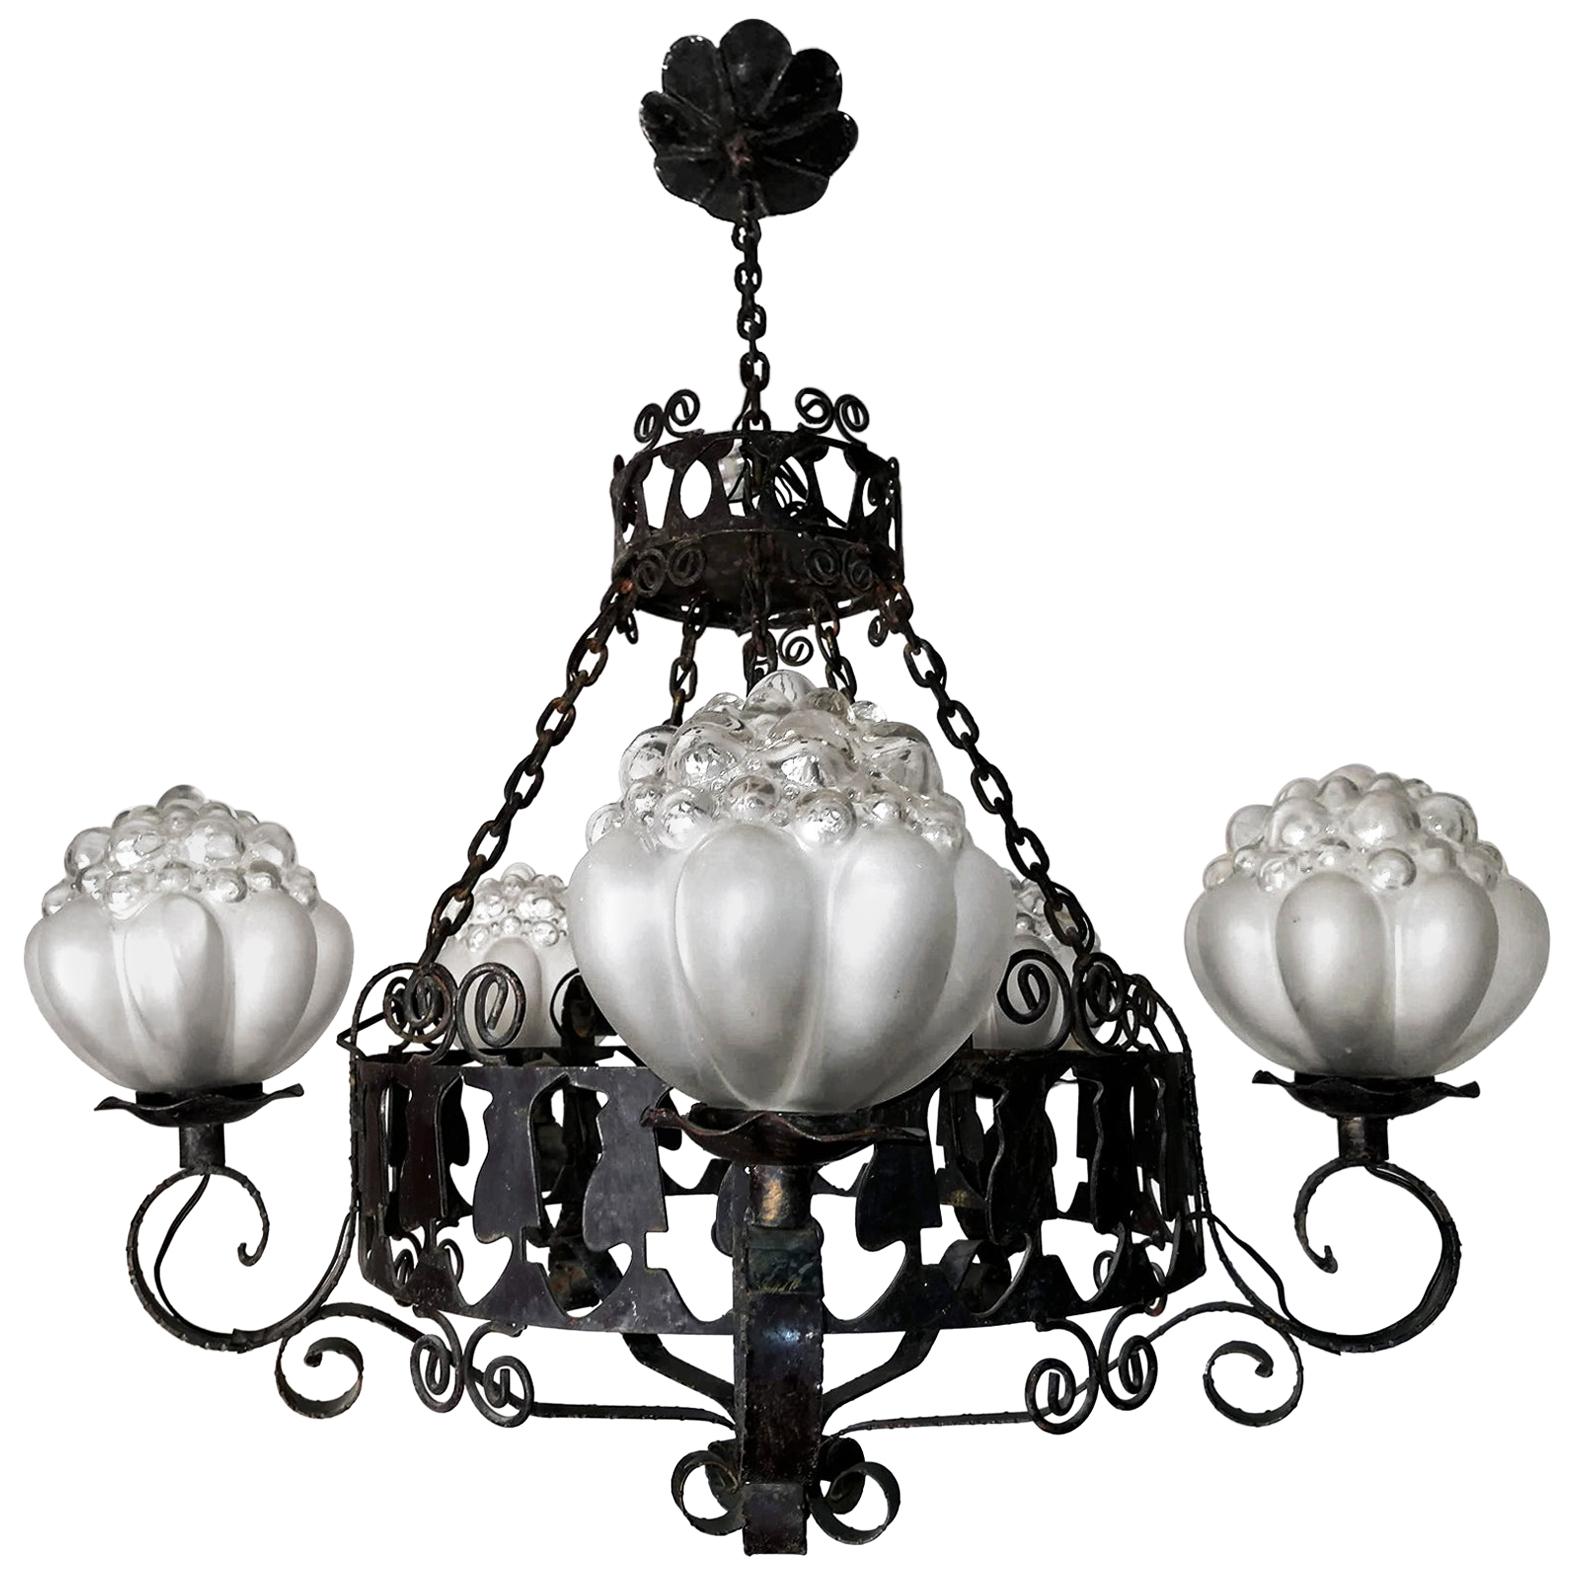 Rare Italian Murano Bubble Art Glass Hand Forged Wrought Iron Hanging Chandelier For Sale